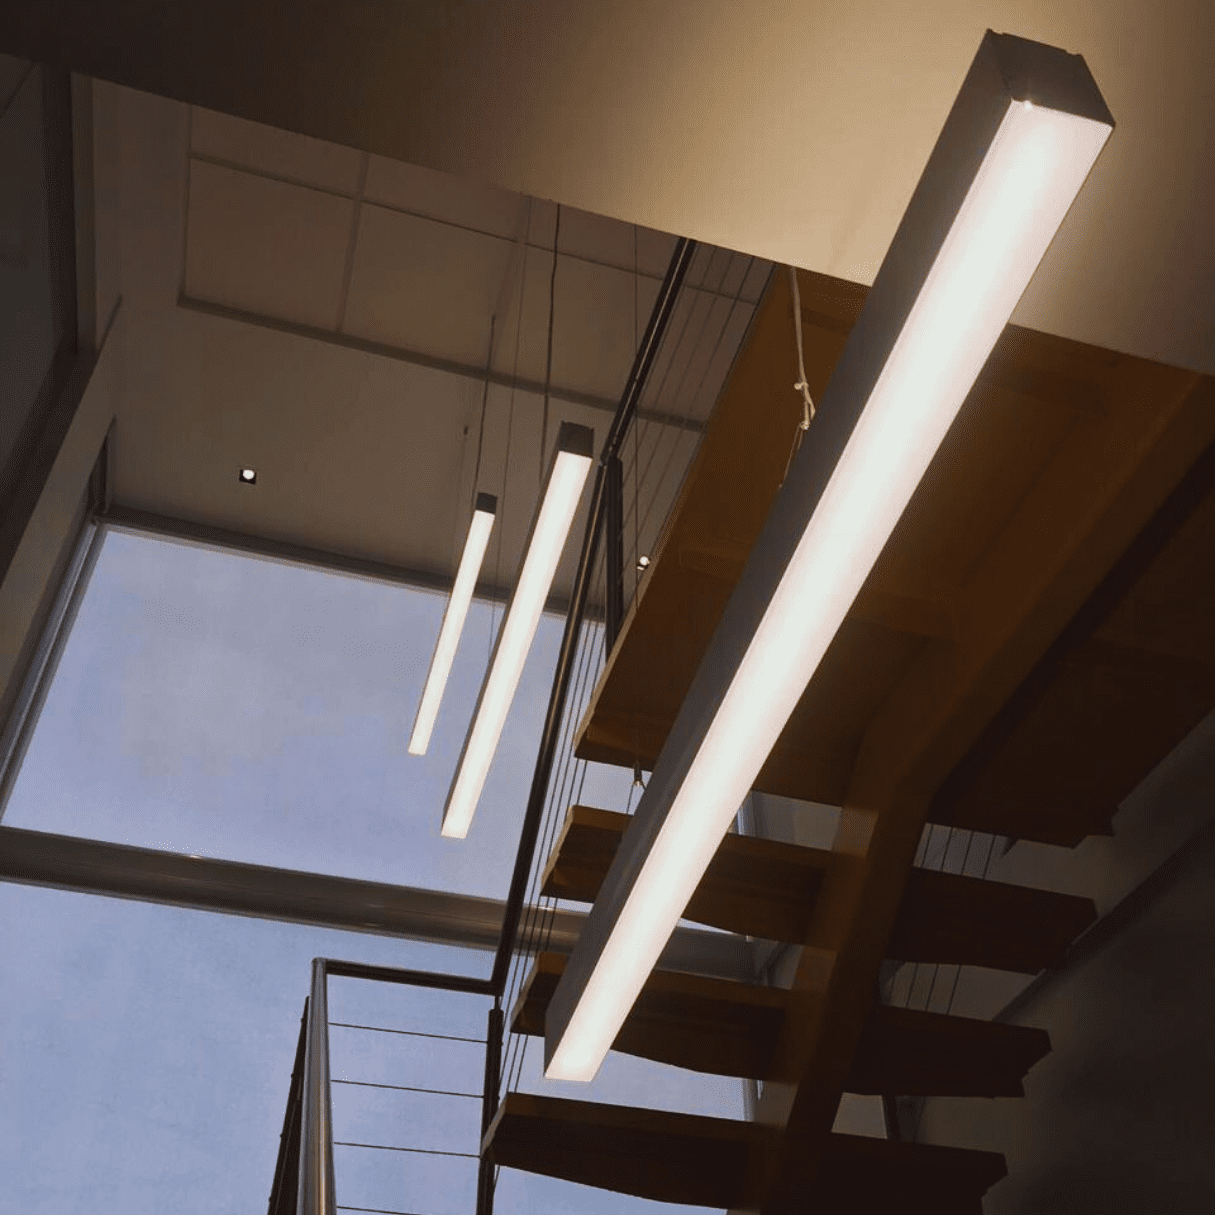 S17 Purex2 Suspended Linear Lighting